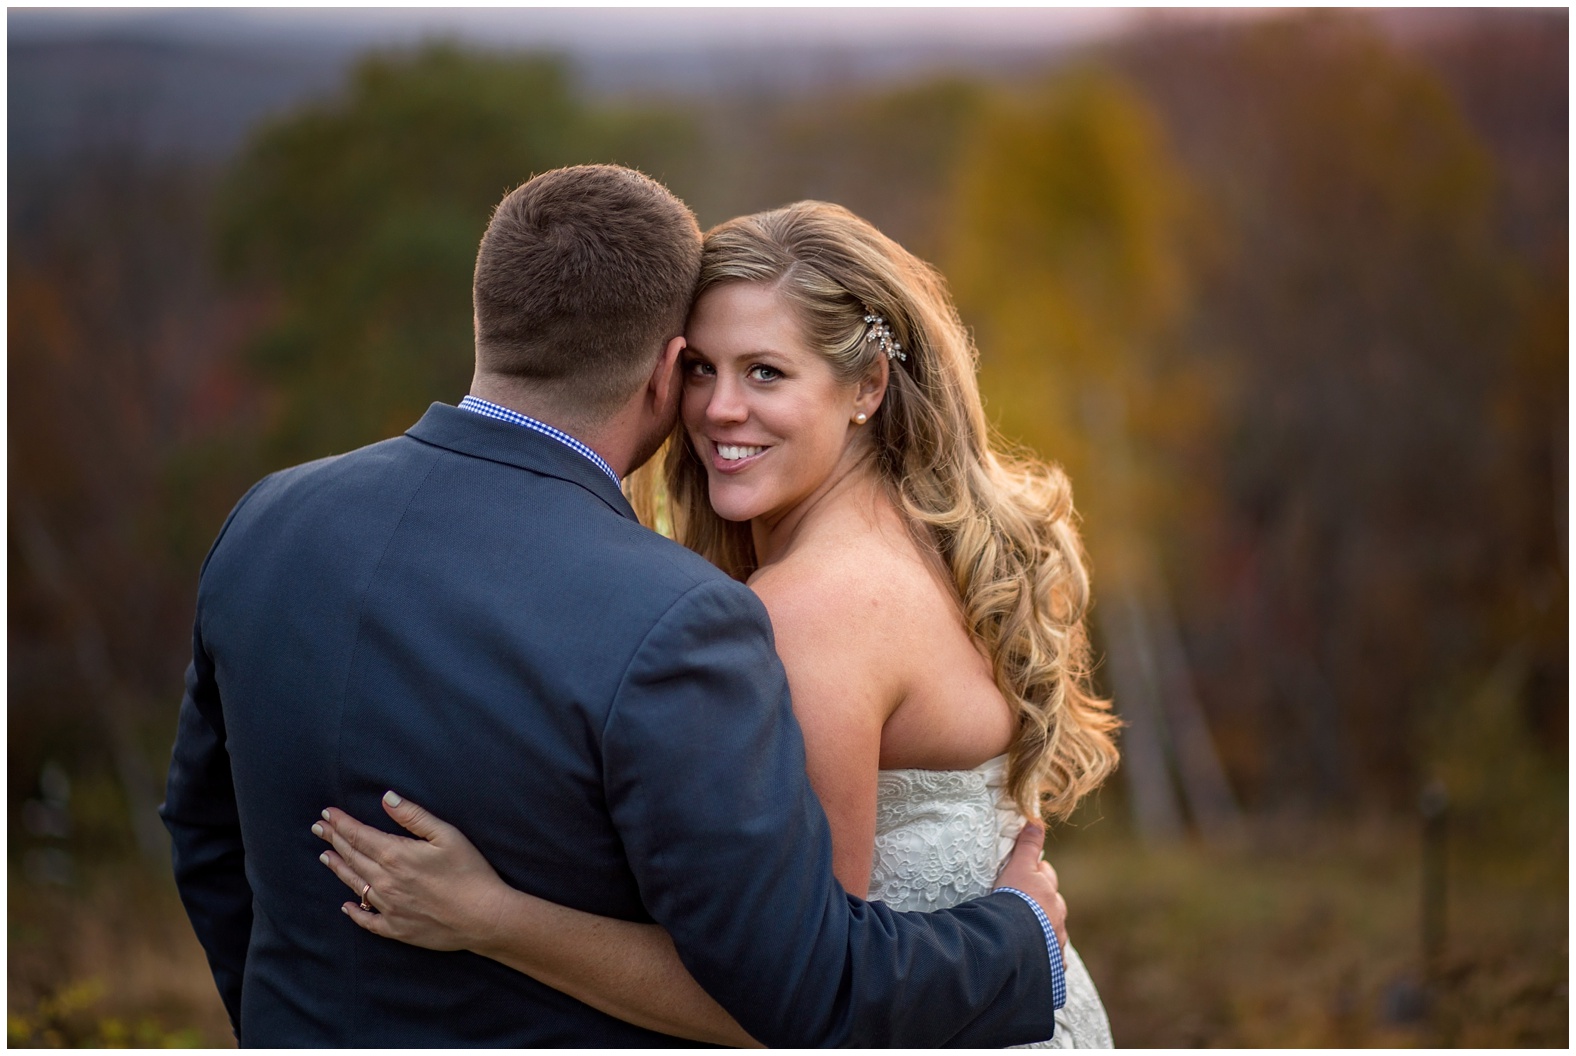 scenic,eclectic,fall,autumn,mountain,mountainview,wedding,cobb hill estate,harrisville,New hampshire,NH,new england,country,tented wedding,